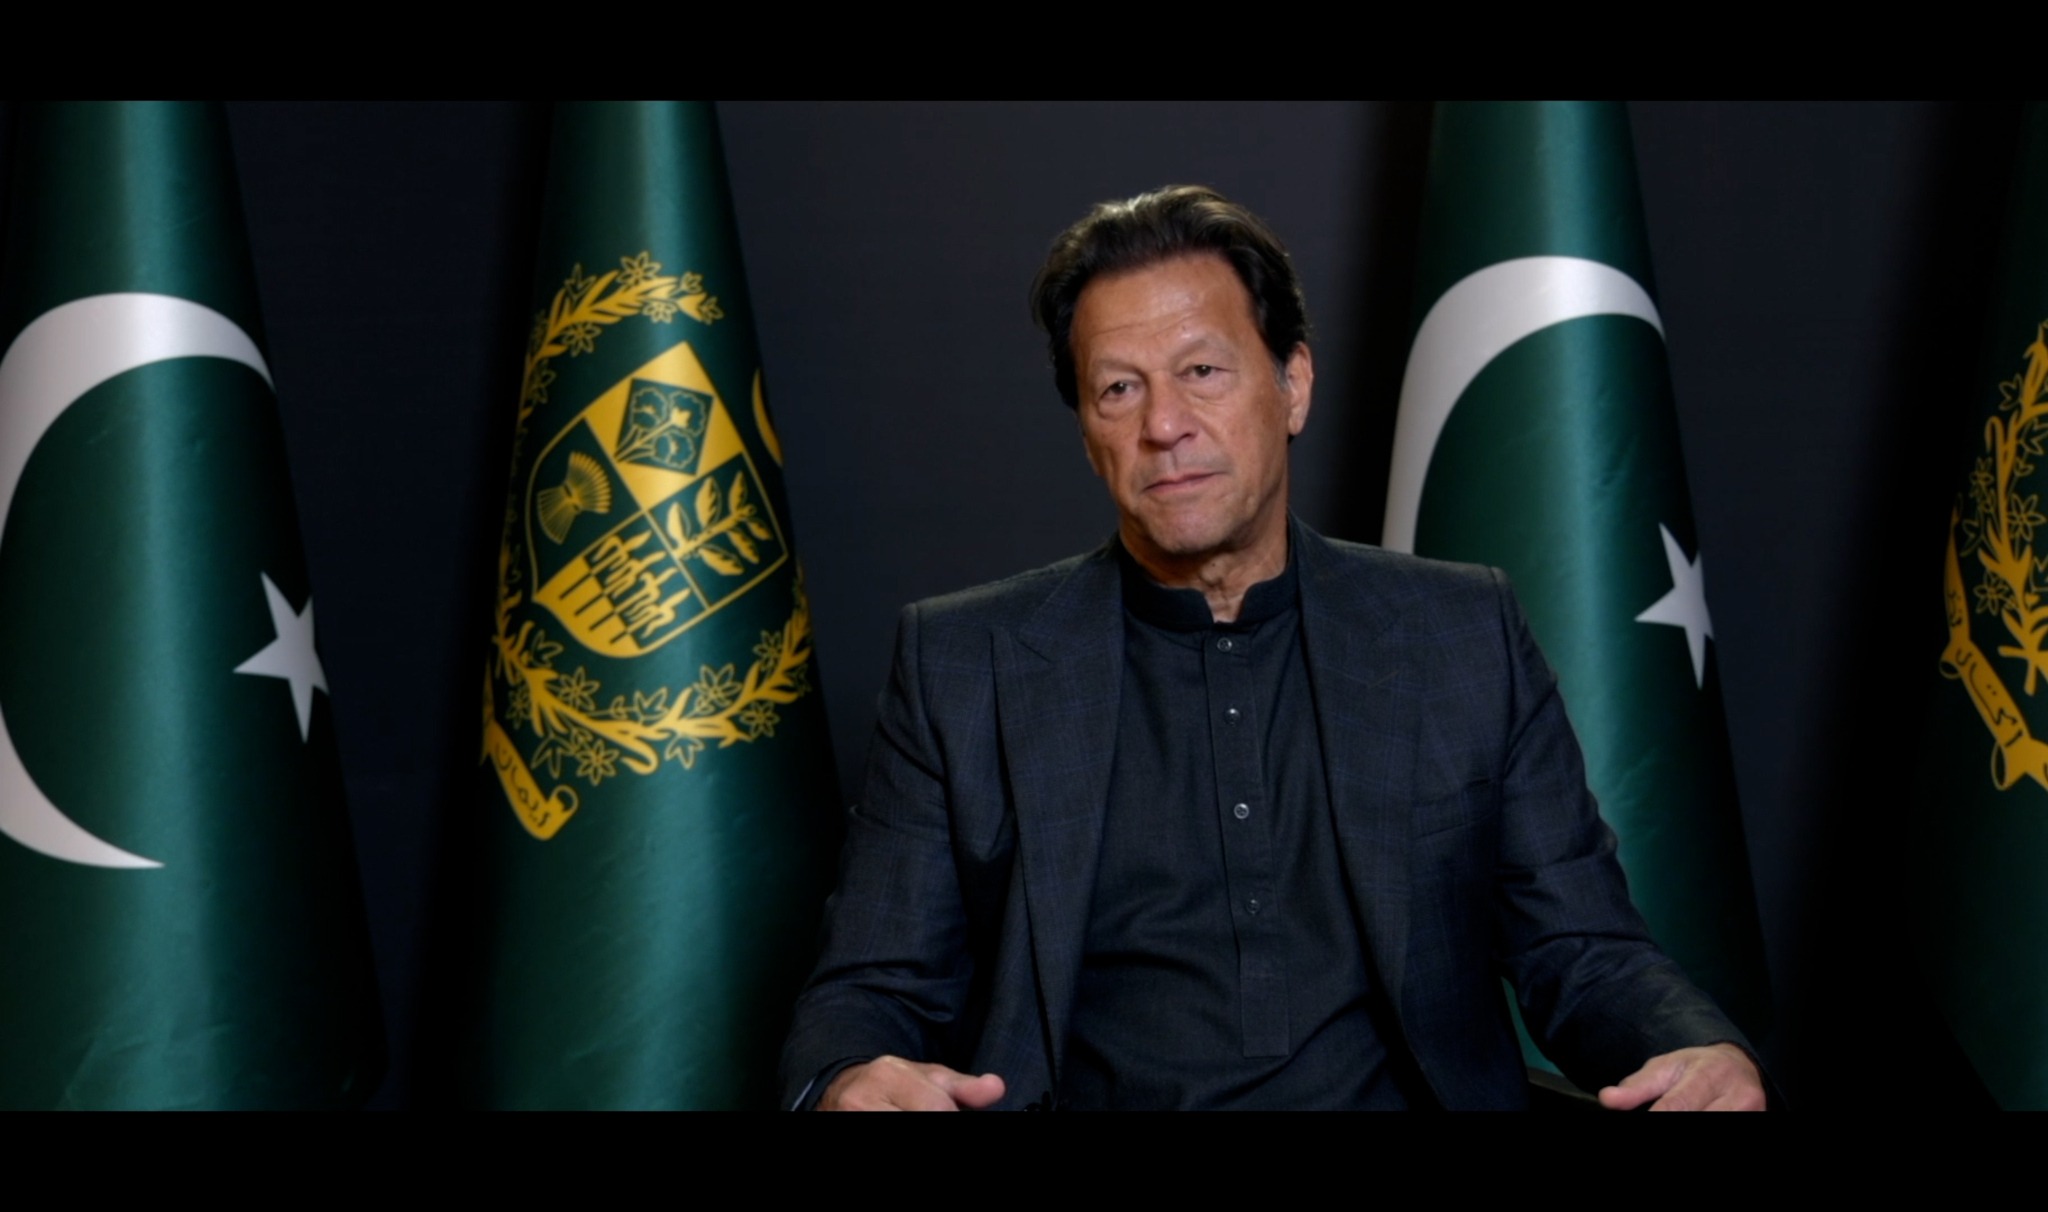 Imran Khan: ‘West gains from corruption’